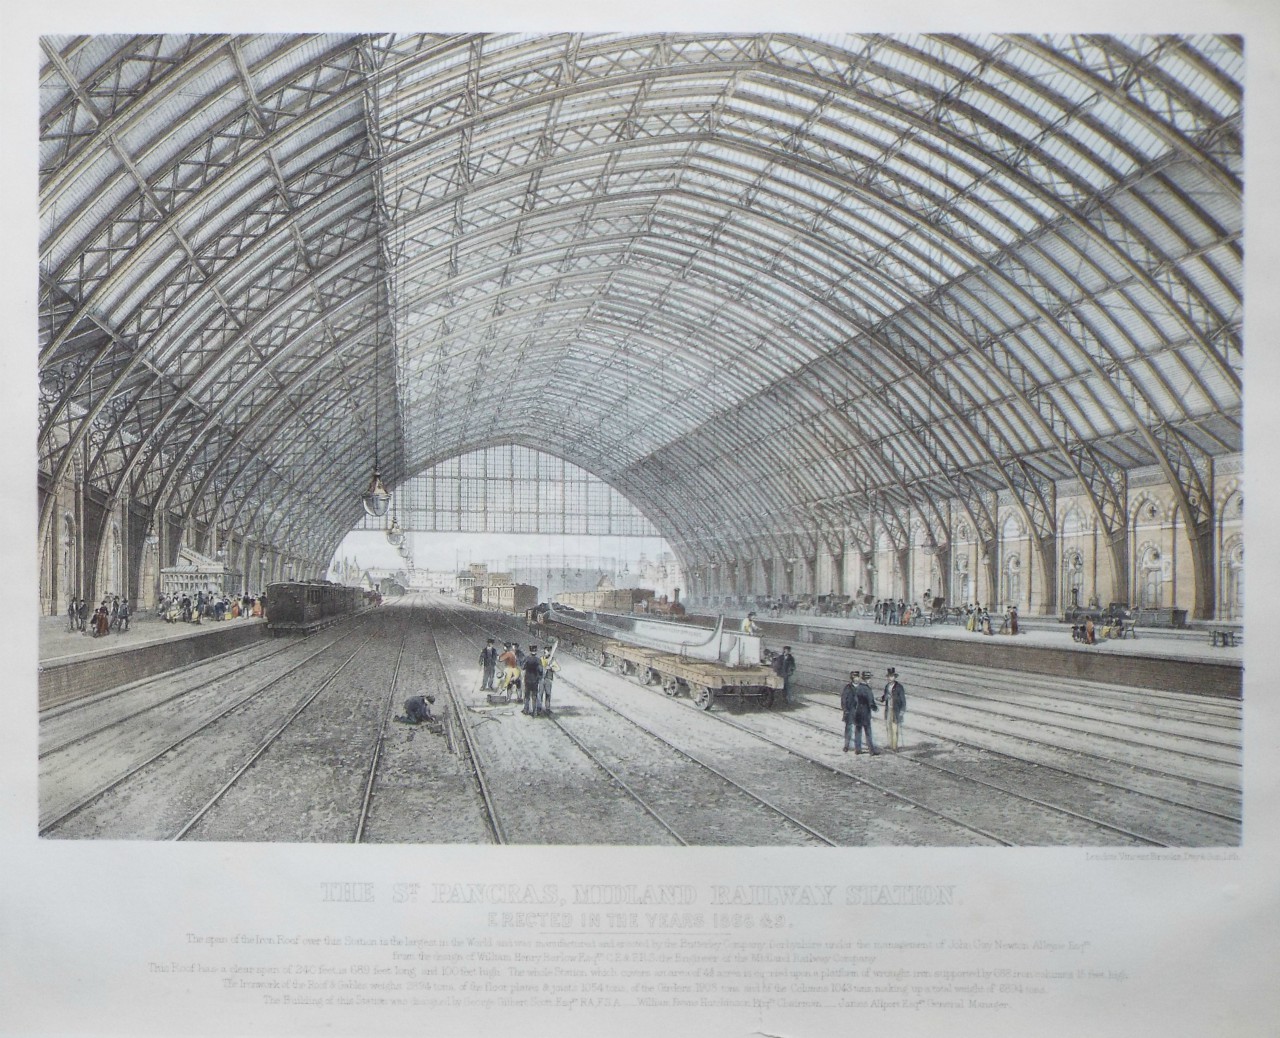 Lithograph - The St. Pancras Midland Railway Station Erected in the Years 1868 & 9.